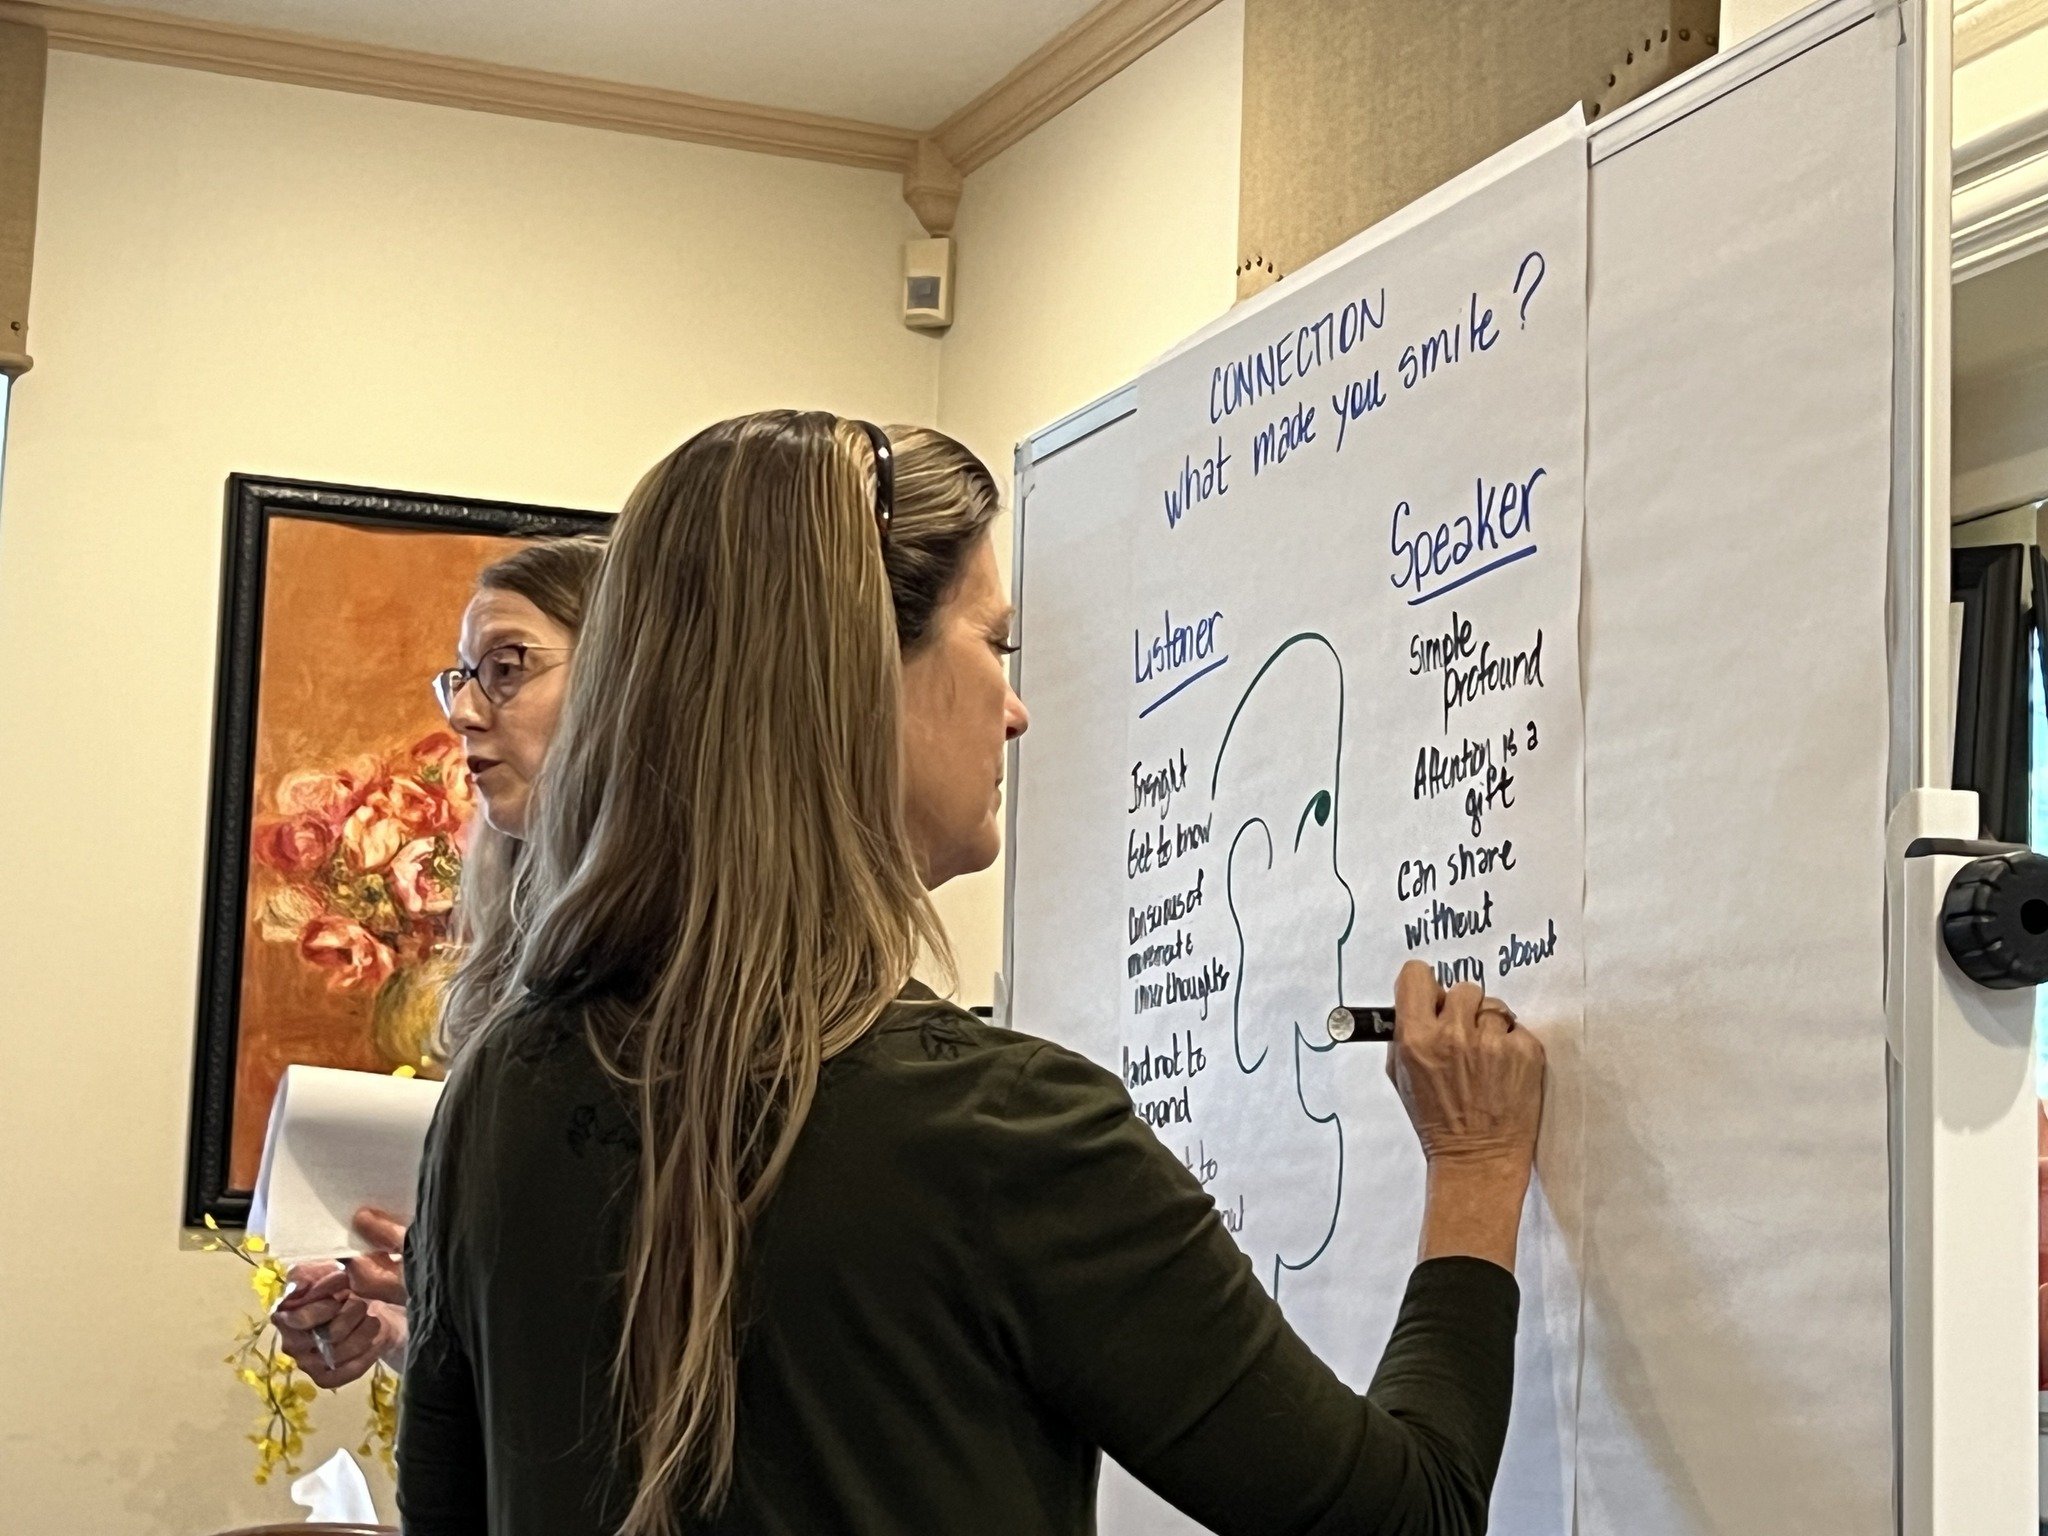 It was so rewarding that for their first board meeting, our two newest members, Natalia Carvalho-Pinto and Deborah Harsha, were able to be part of the &quot;Having Generative Discussions&quot; experiential workshop, facilitated by Amy Mervak and Alli